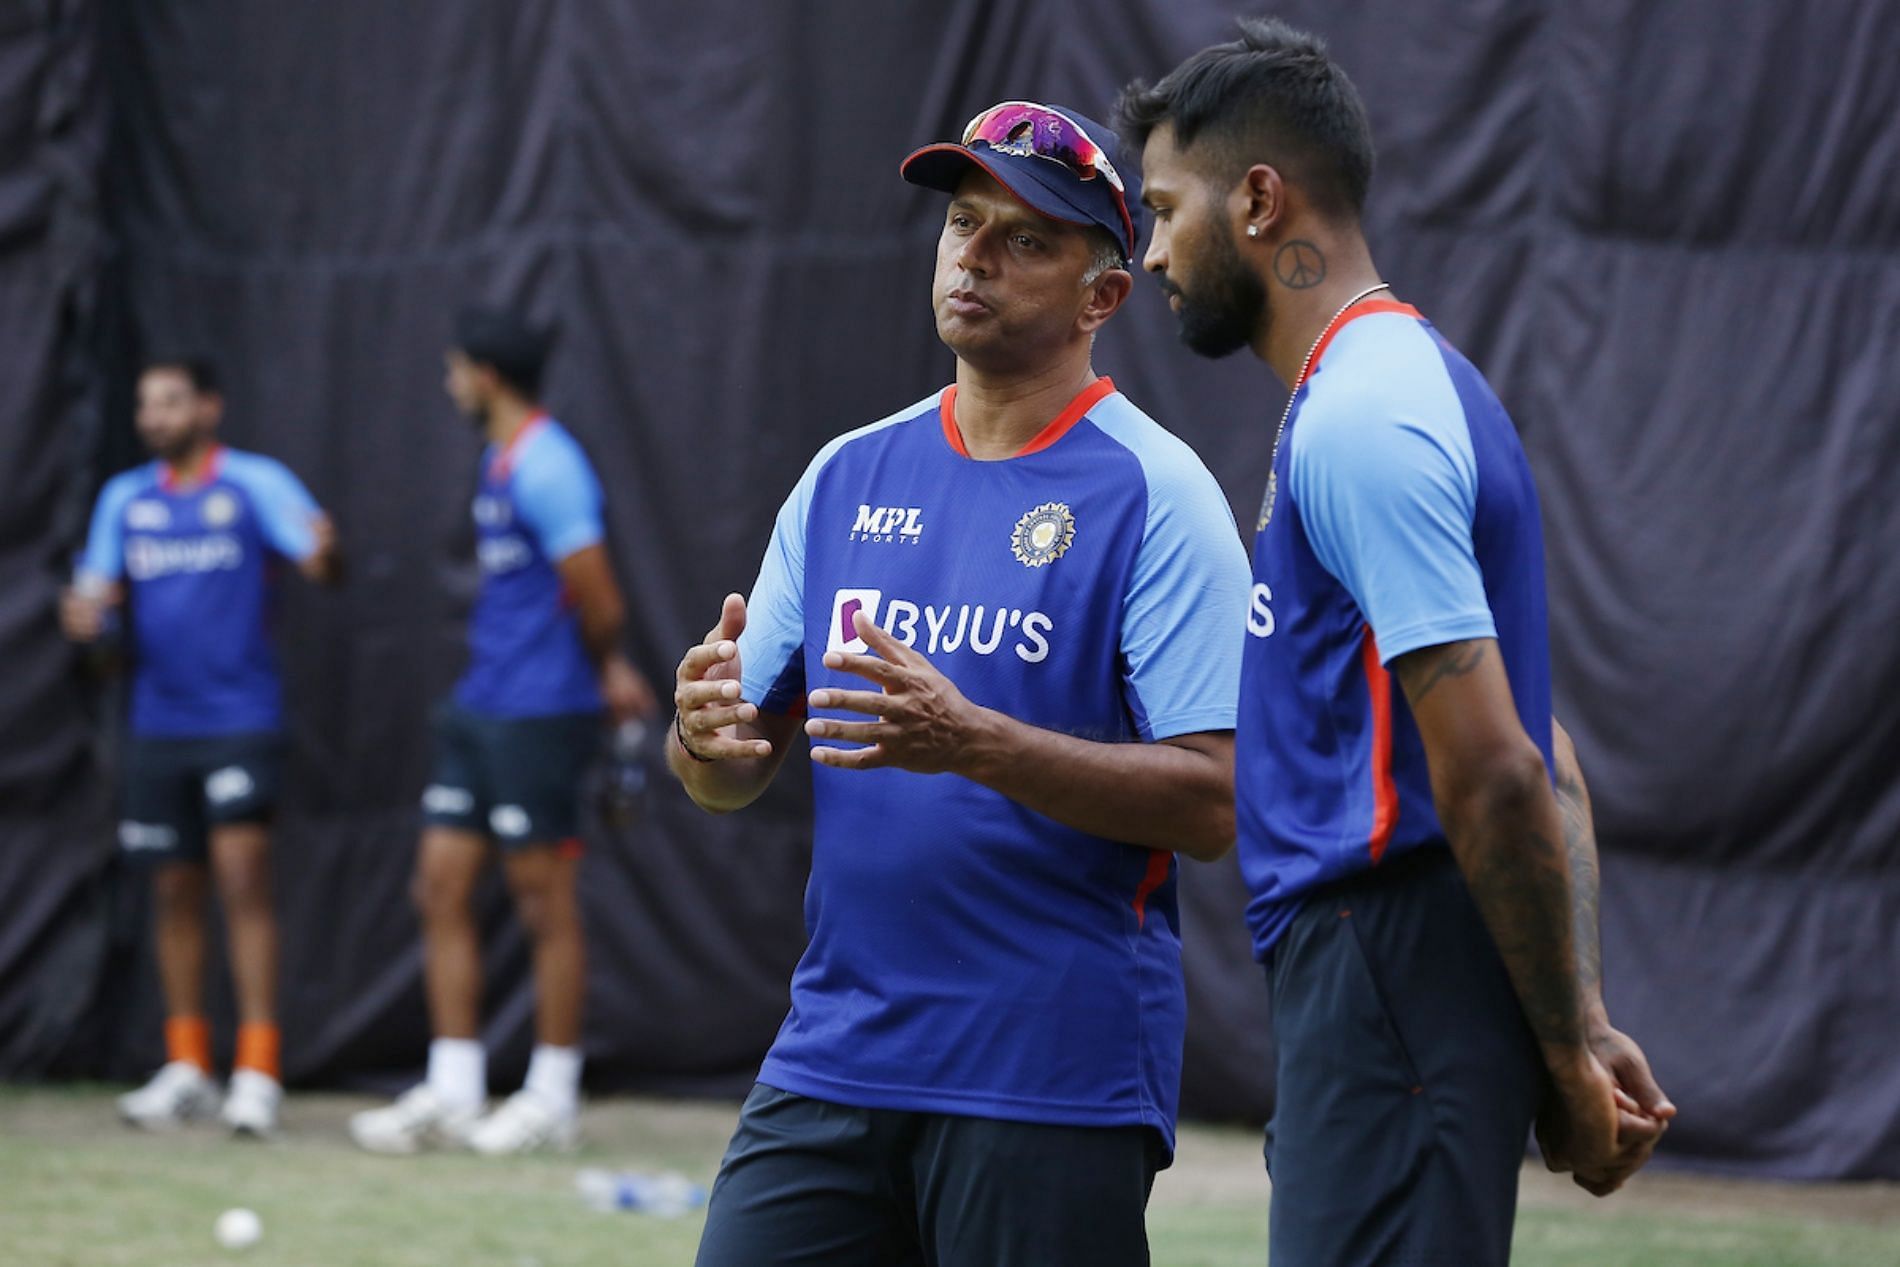 Rahul Dravid on challenges of being Team India’s head coach - “Six captains in eight months; probably wasn’t the plan”